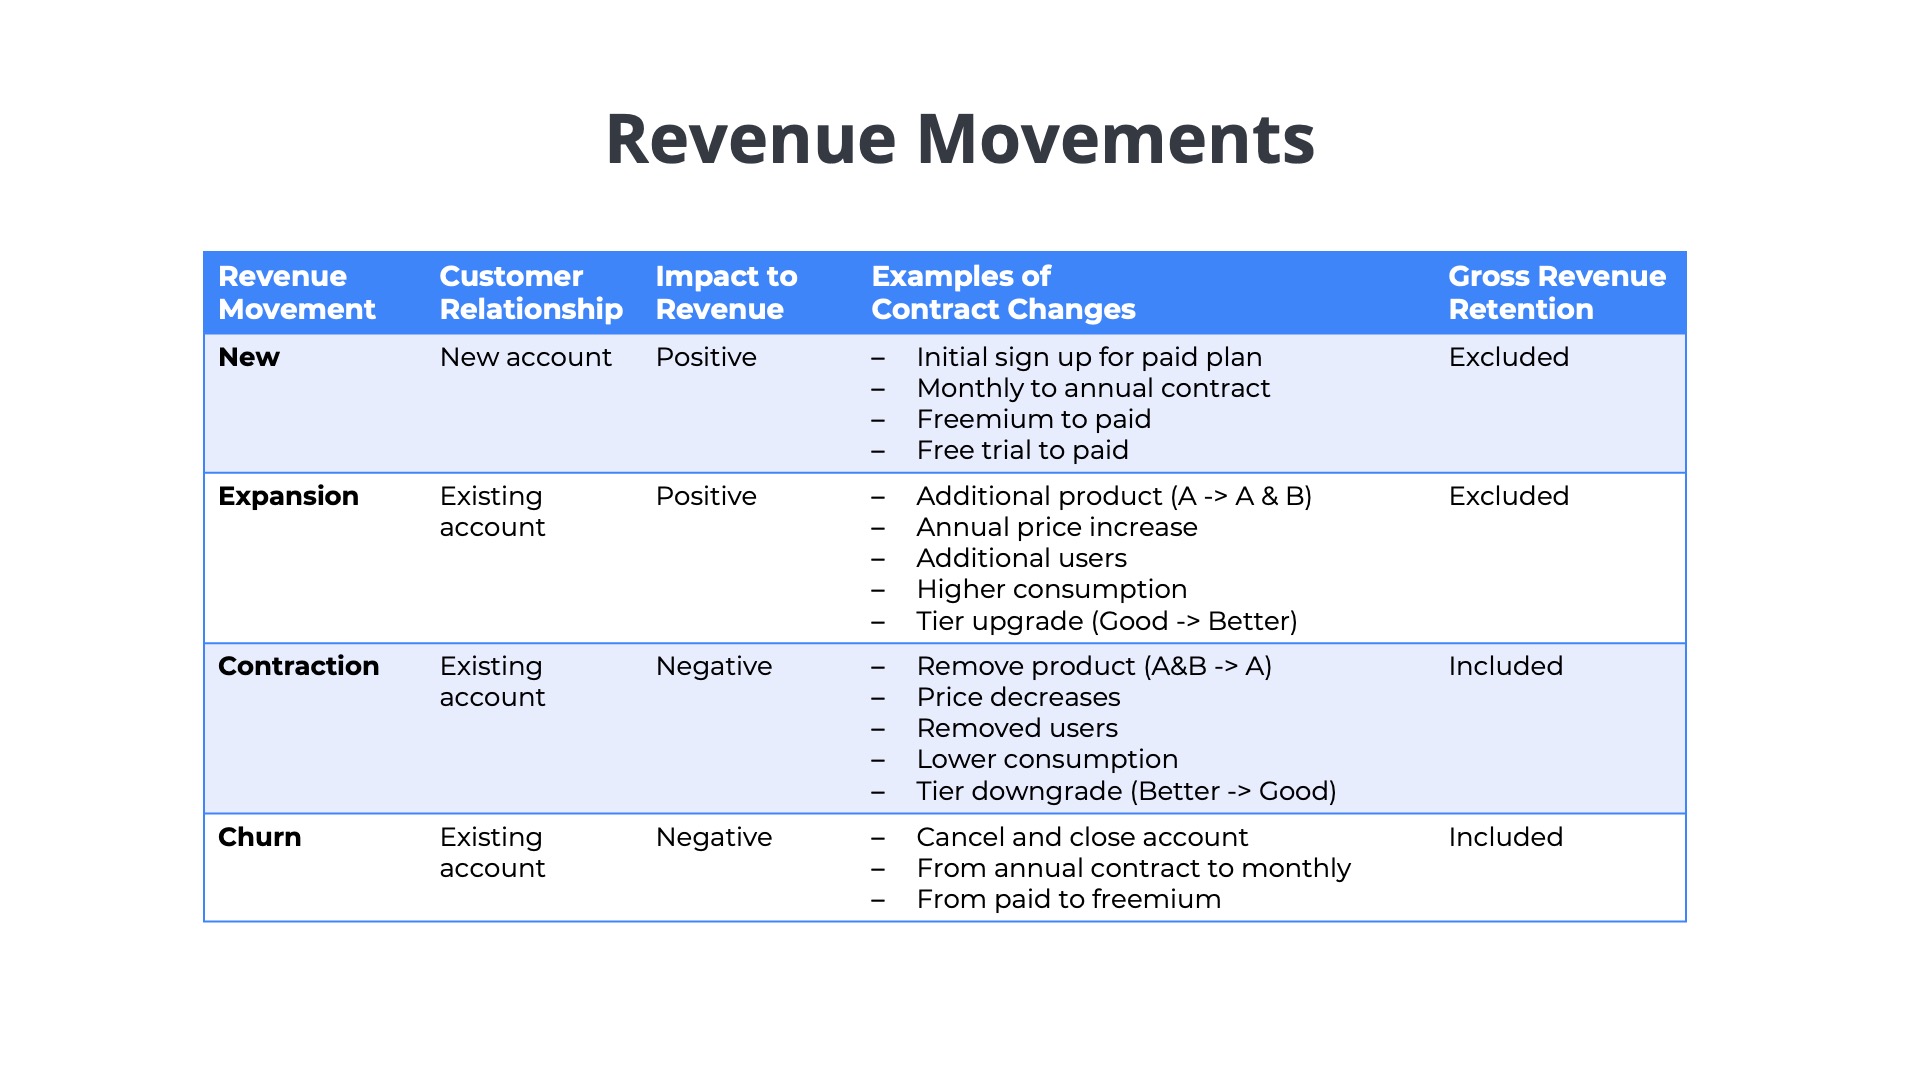 ARR movements for SaaS companies that impact dollar based gross revenue retention